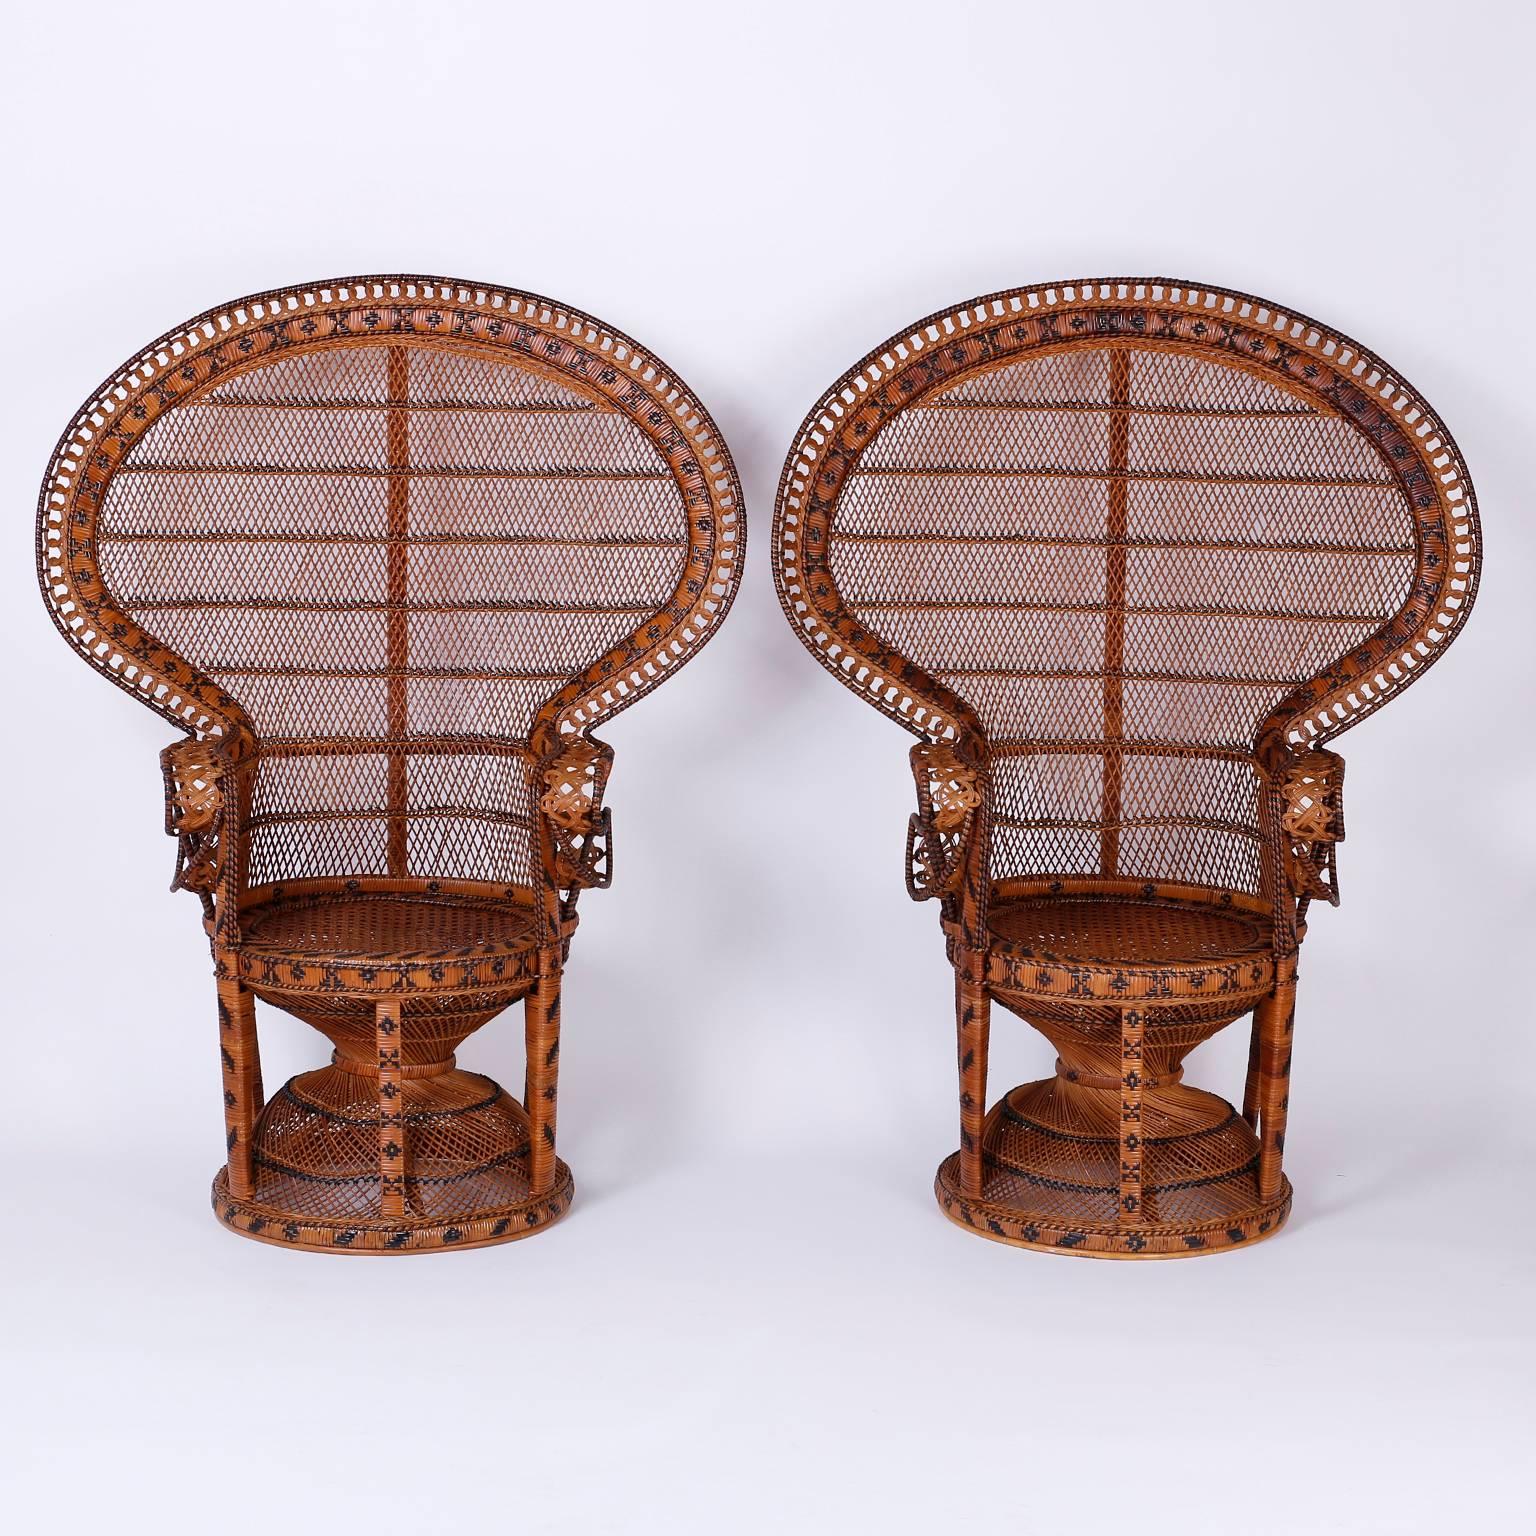 Here is a fine pair of Mid-Century peacock armchairs with their iconic form and exotic ambiance. Handcrafted in wicker and reed, decorated with geometric designs similar to snake skin, all in a mellow aged patina. These Classic chairs are in